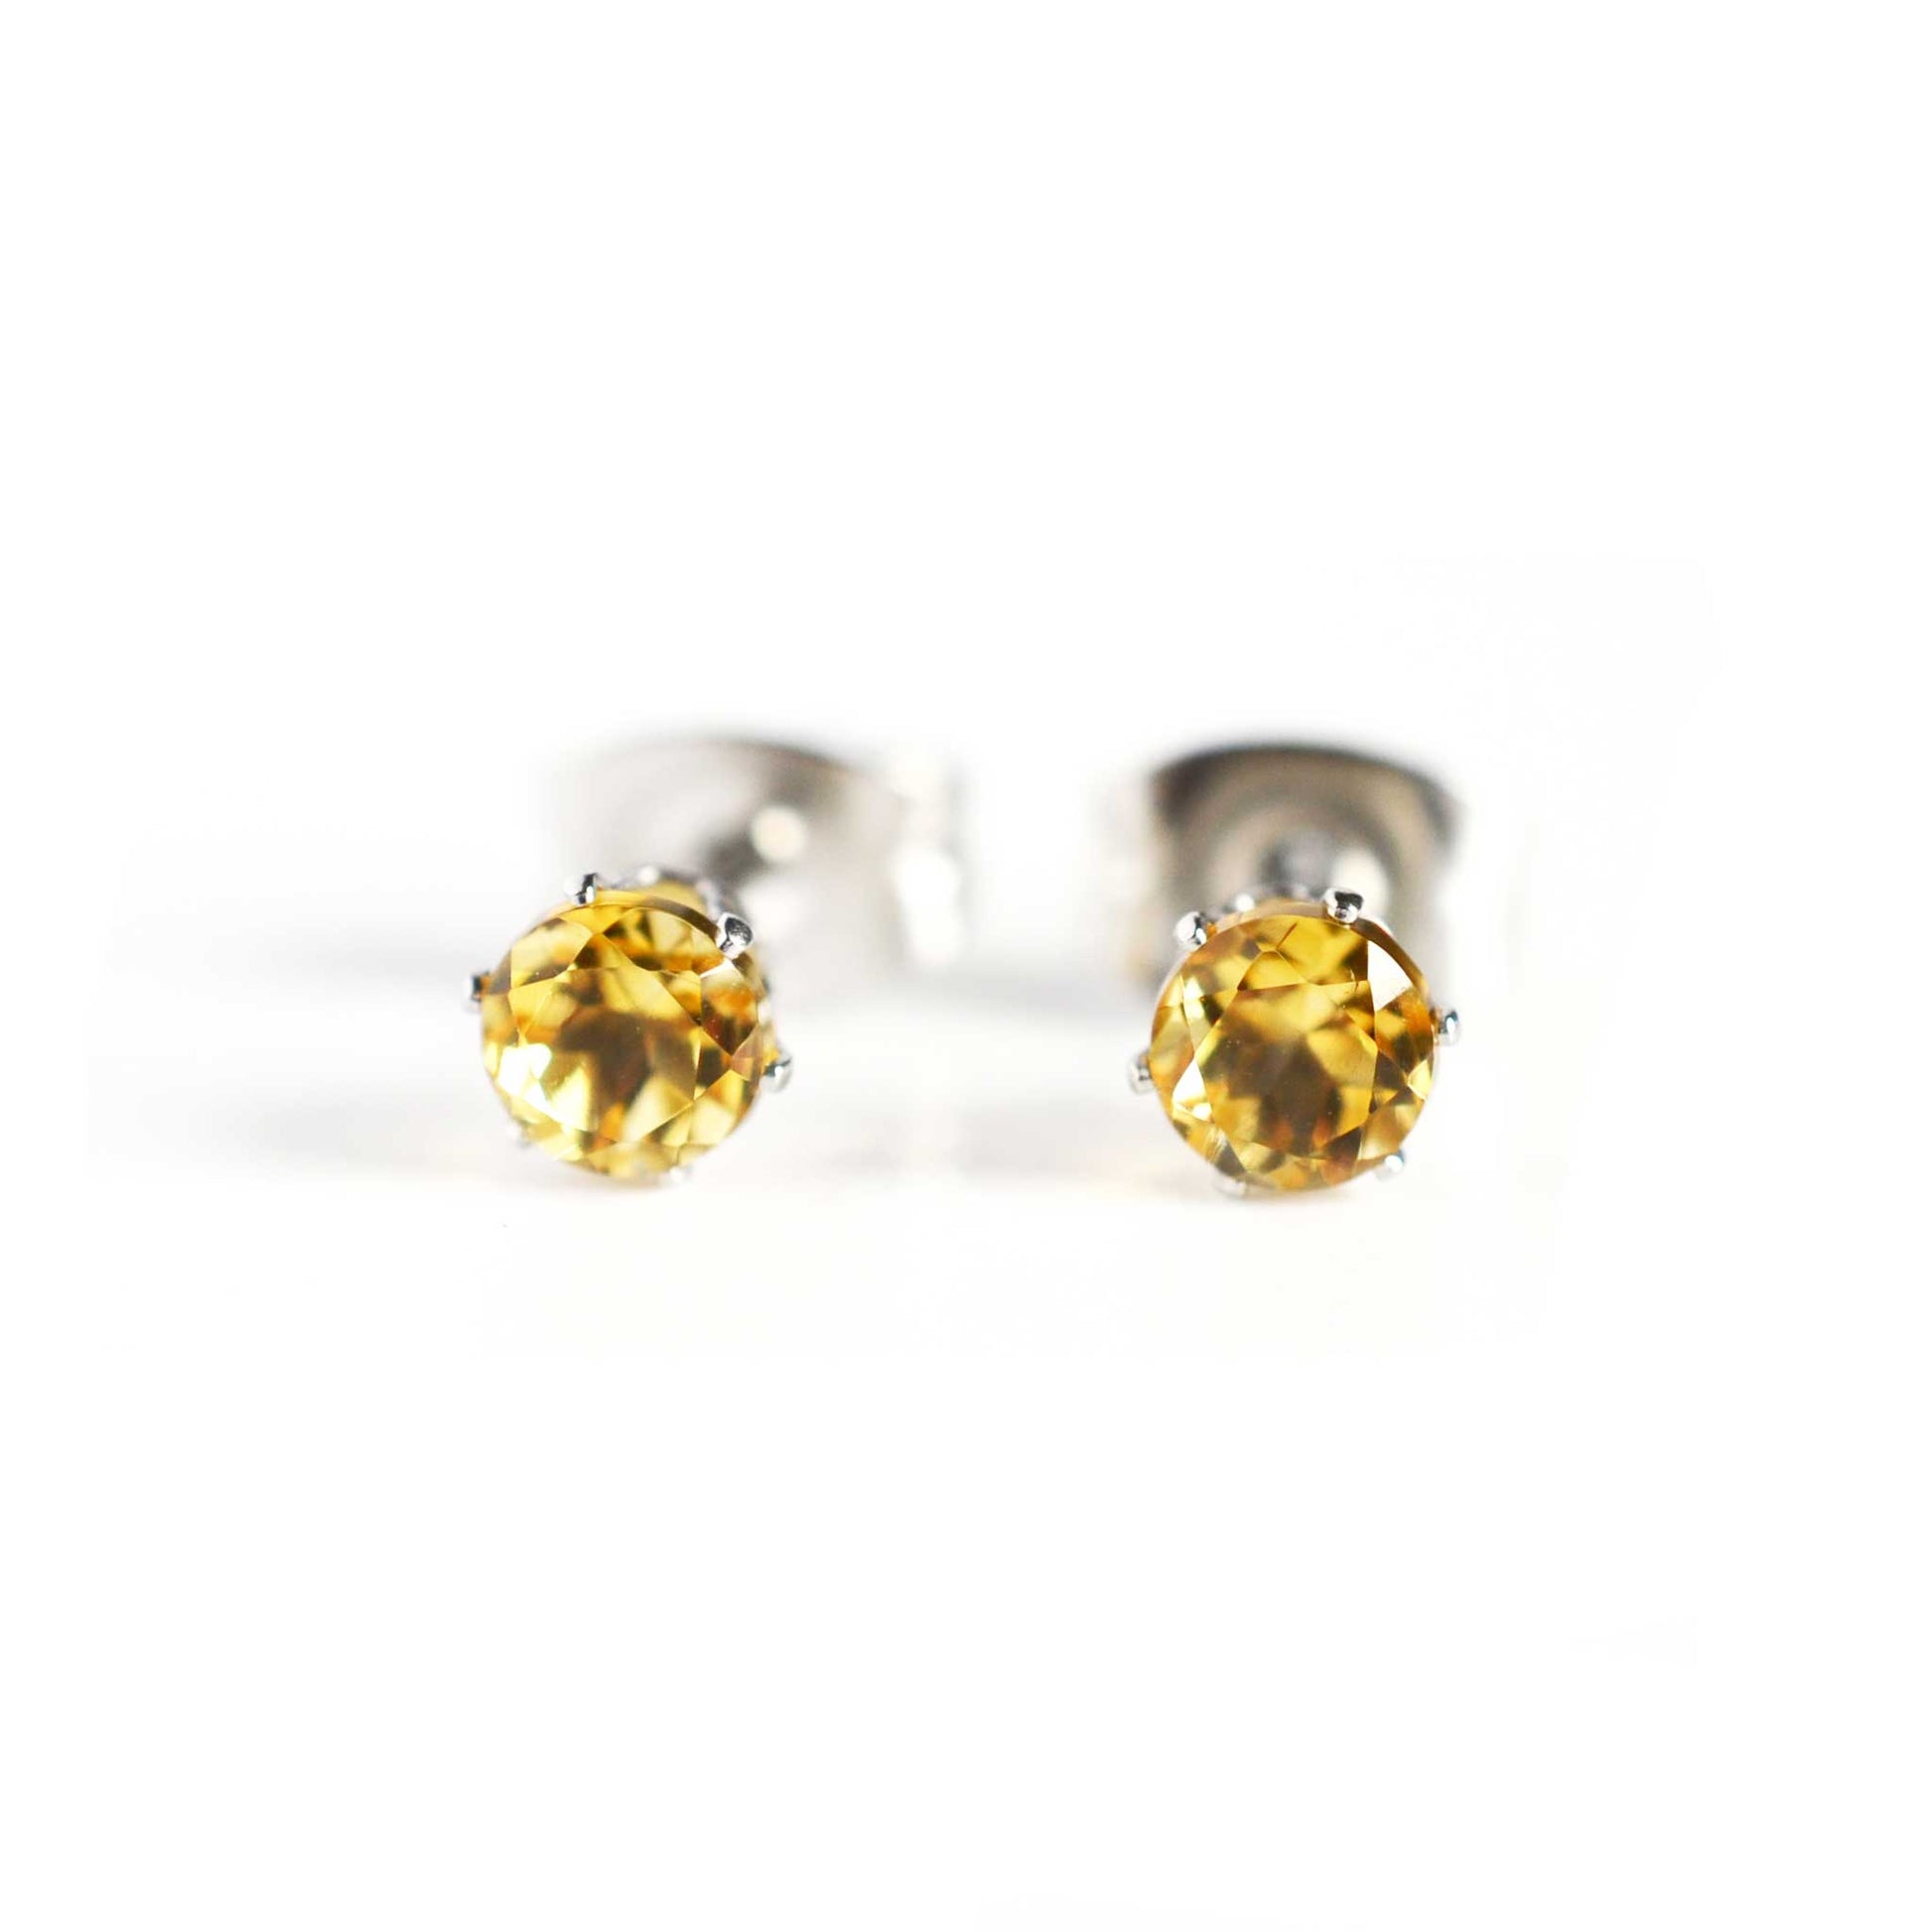 Front view of small yellow faceted Citrine stud earrings on white background